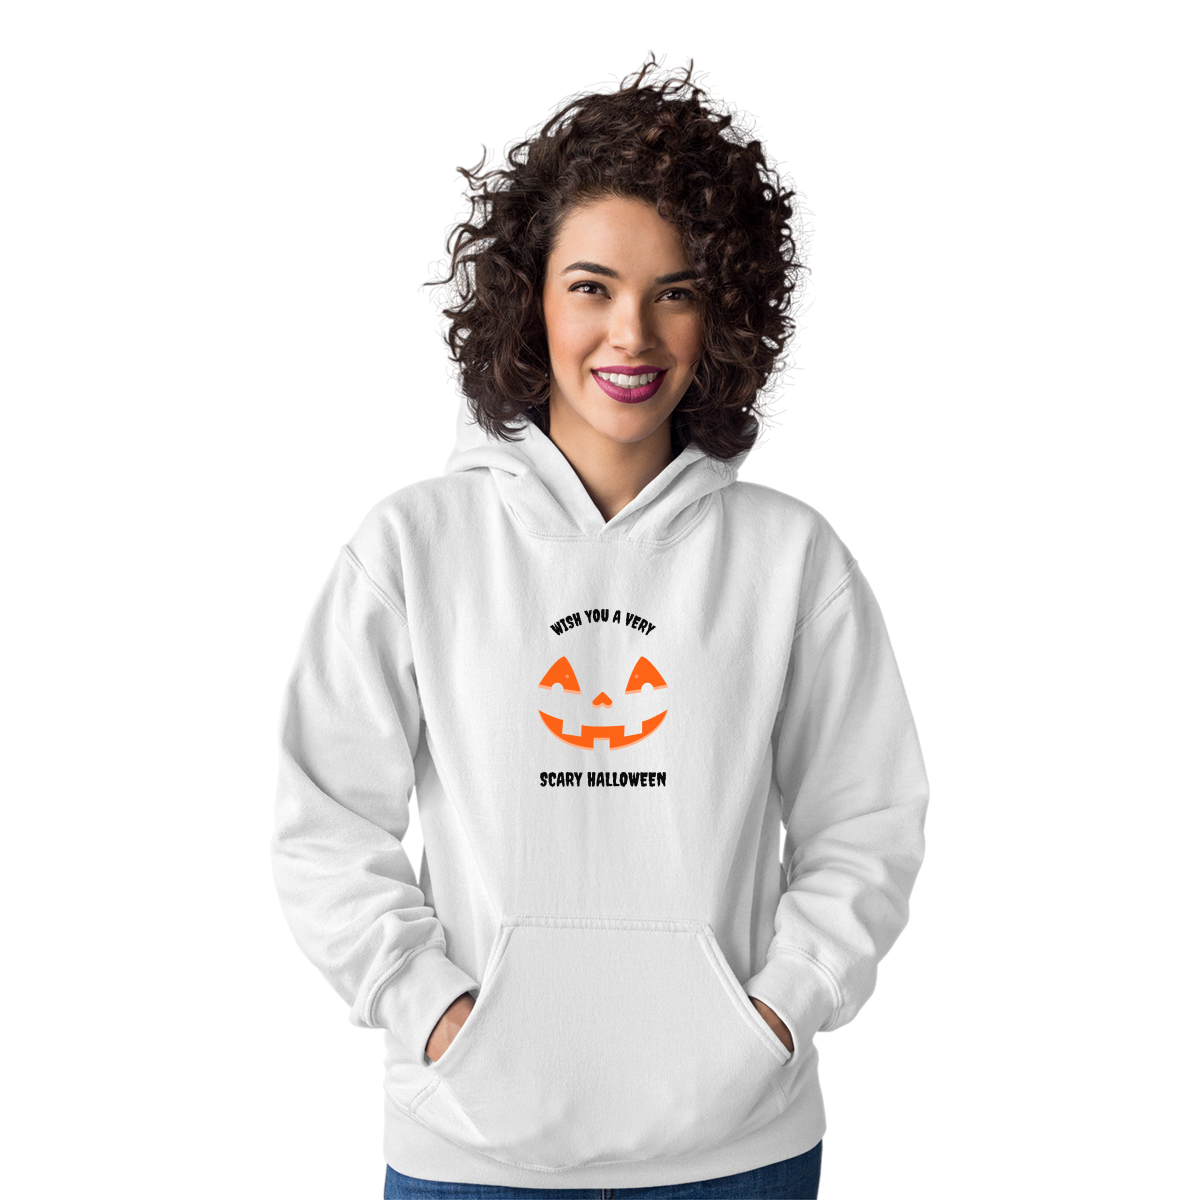 Wish You a Very Scary Halloween Unisex Hoodie | White